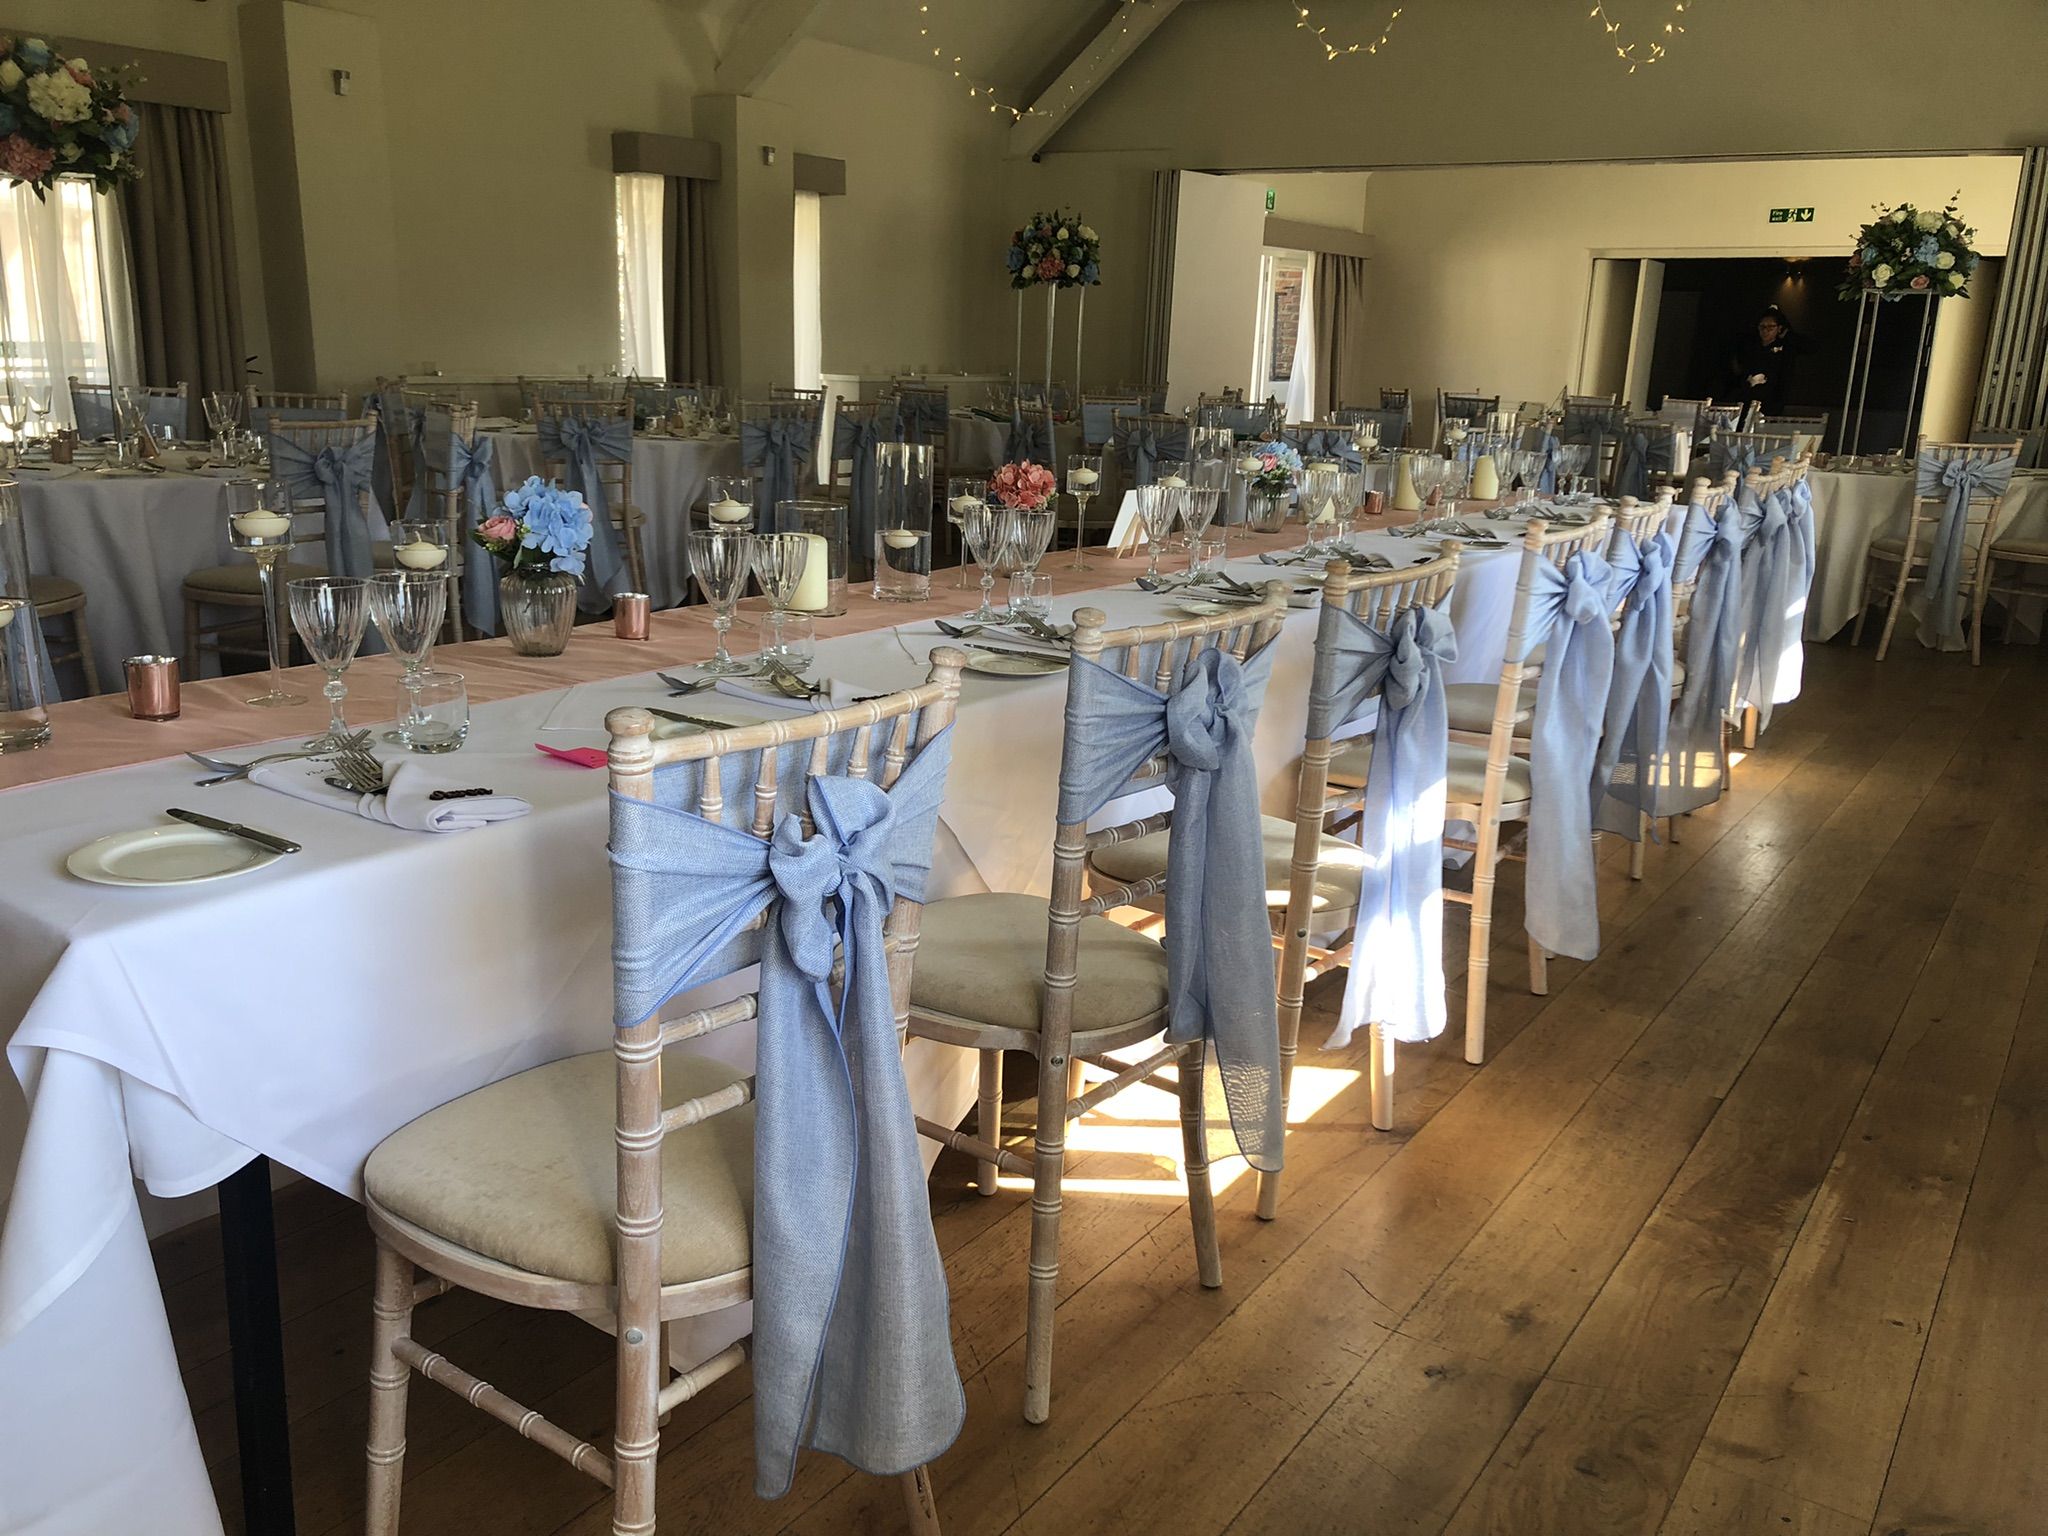 a long table is set up for a formal function.